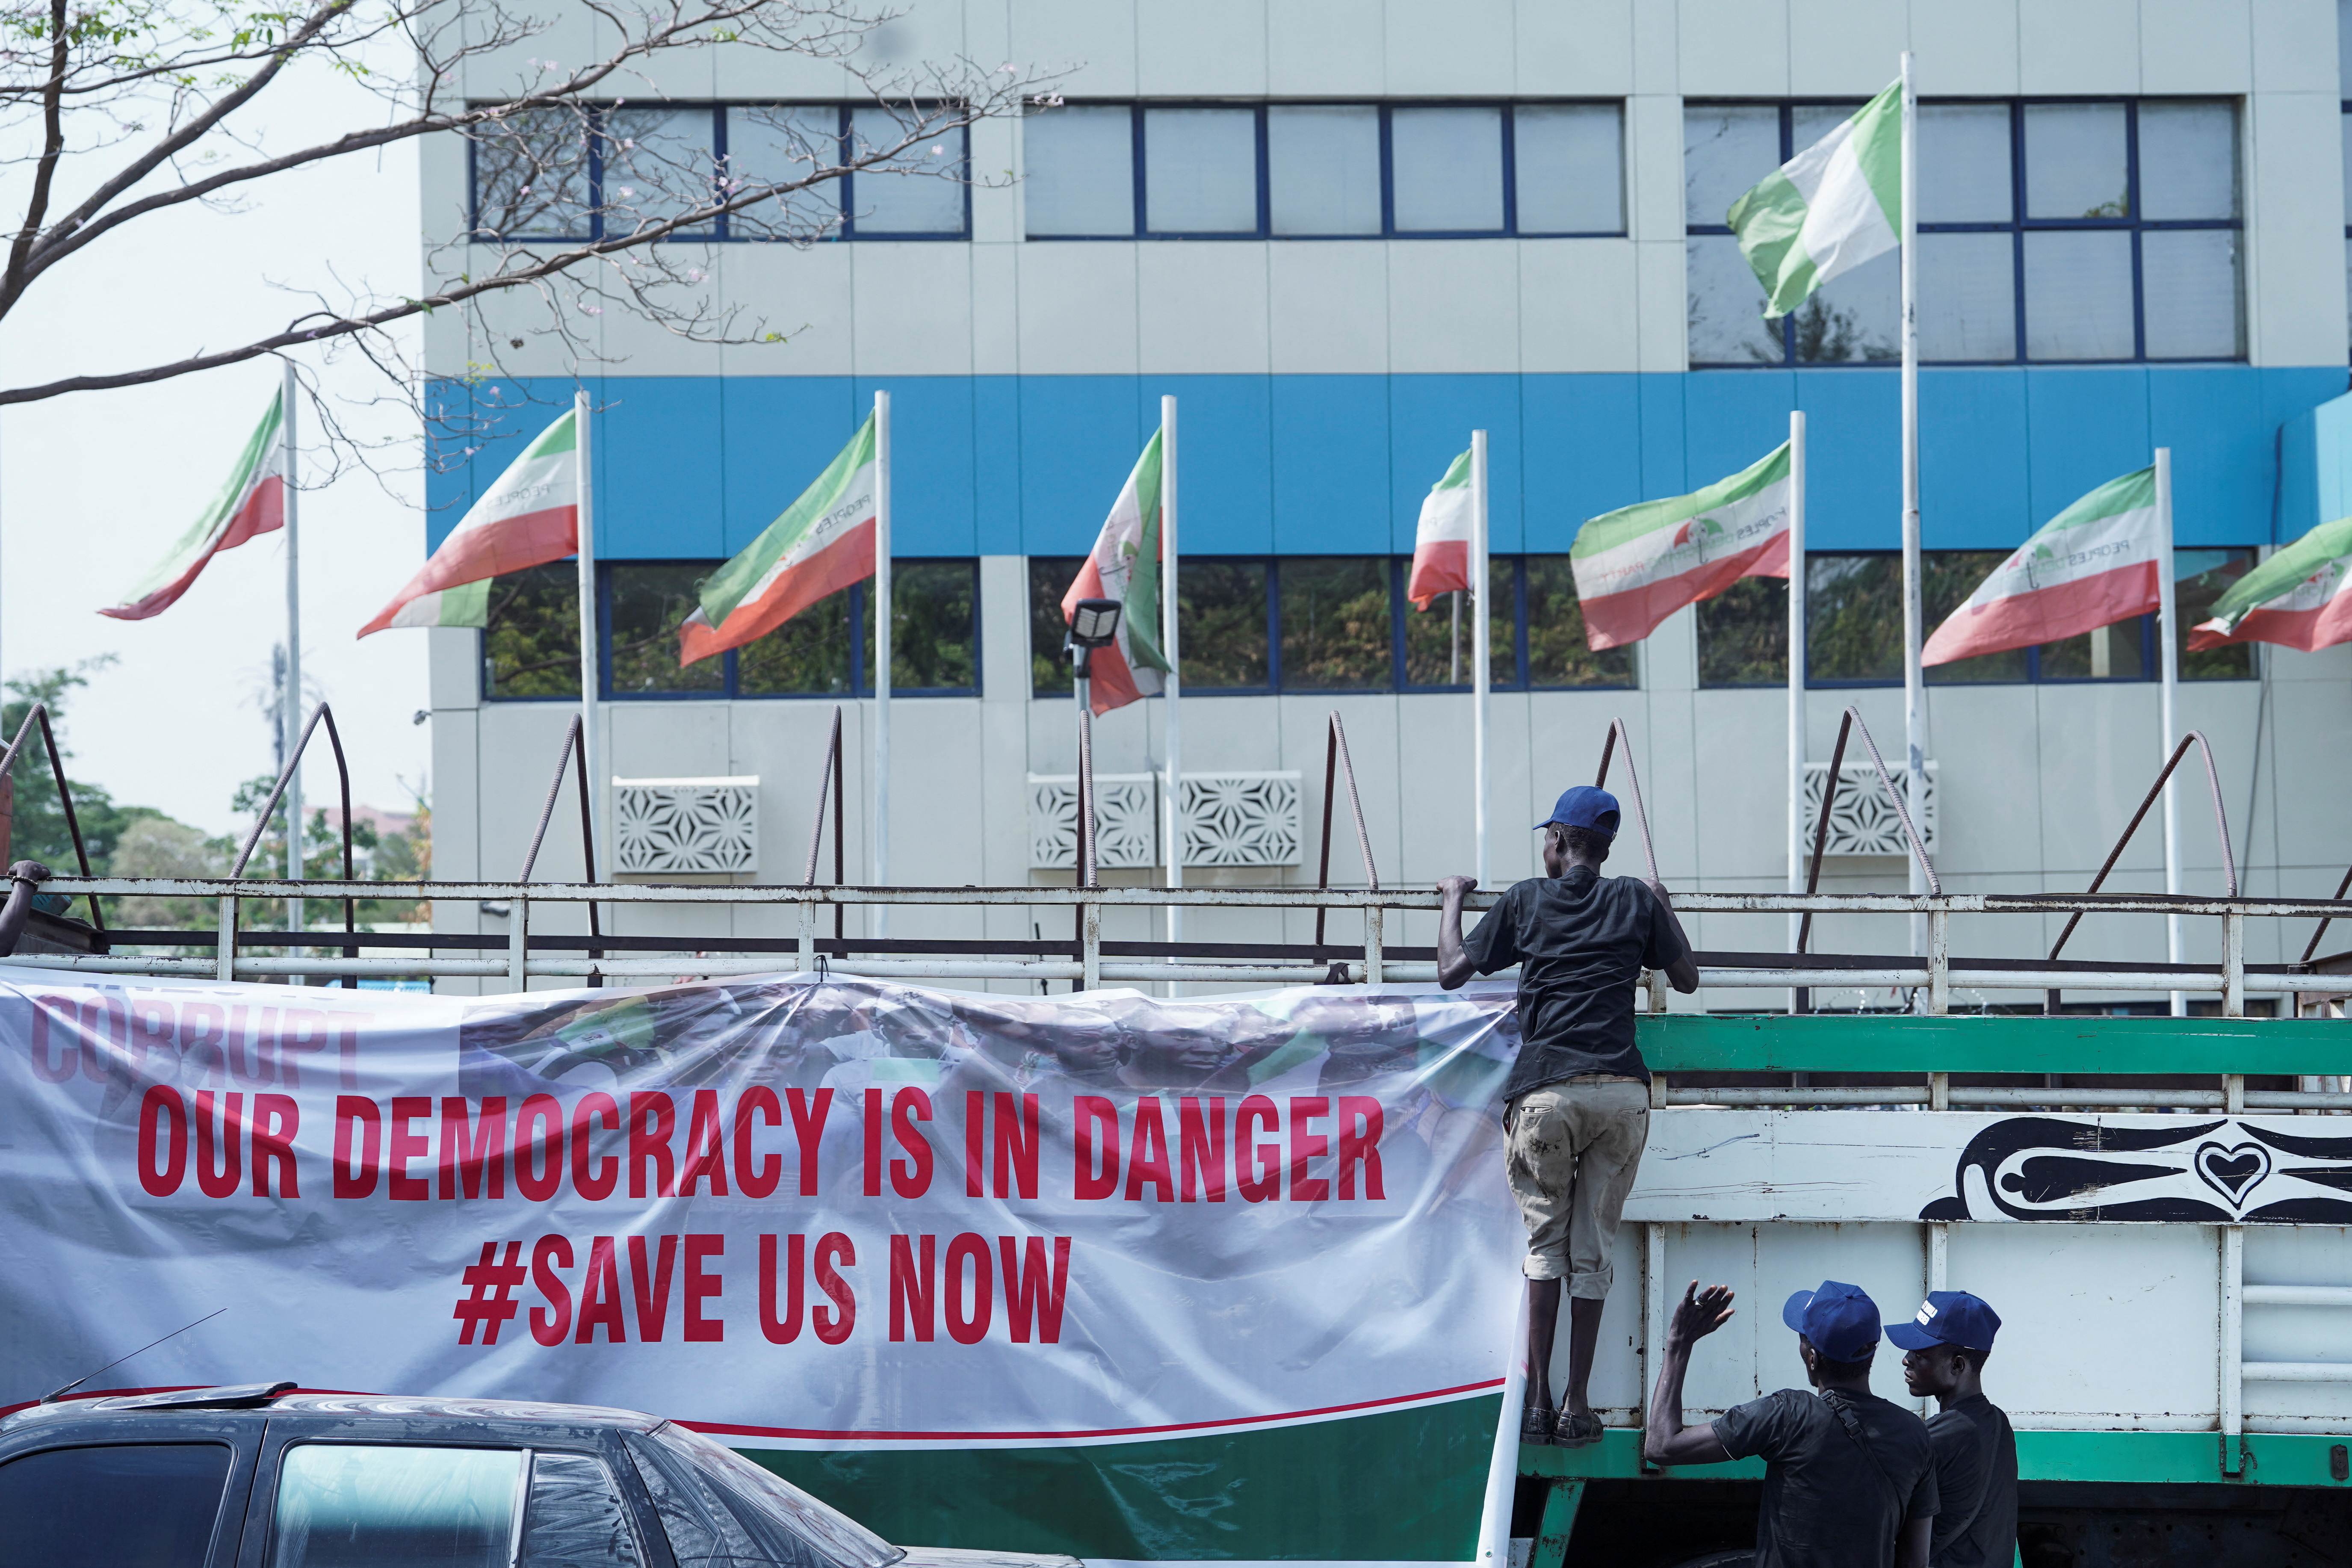 Supporters of the Peoples Democratic Party (PDP) hang protest banner on a truck in front of the Peoples Democratic Party (PDP) secretariat office in Abuja